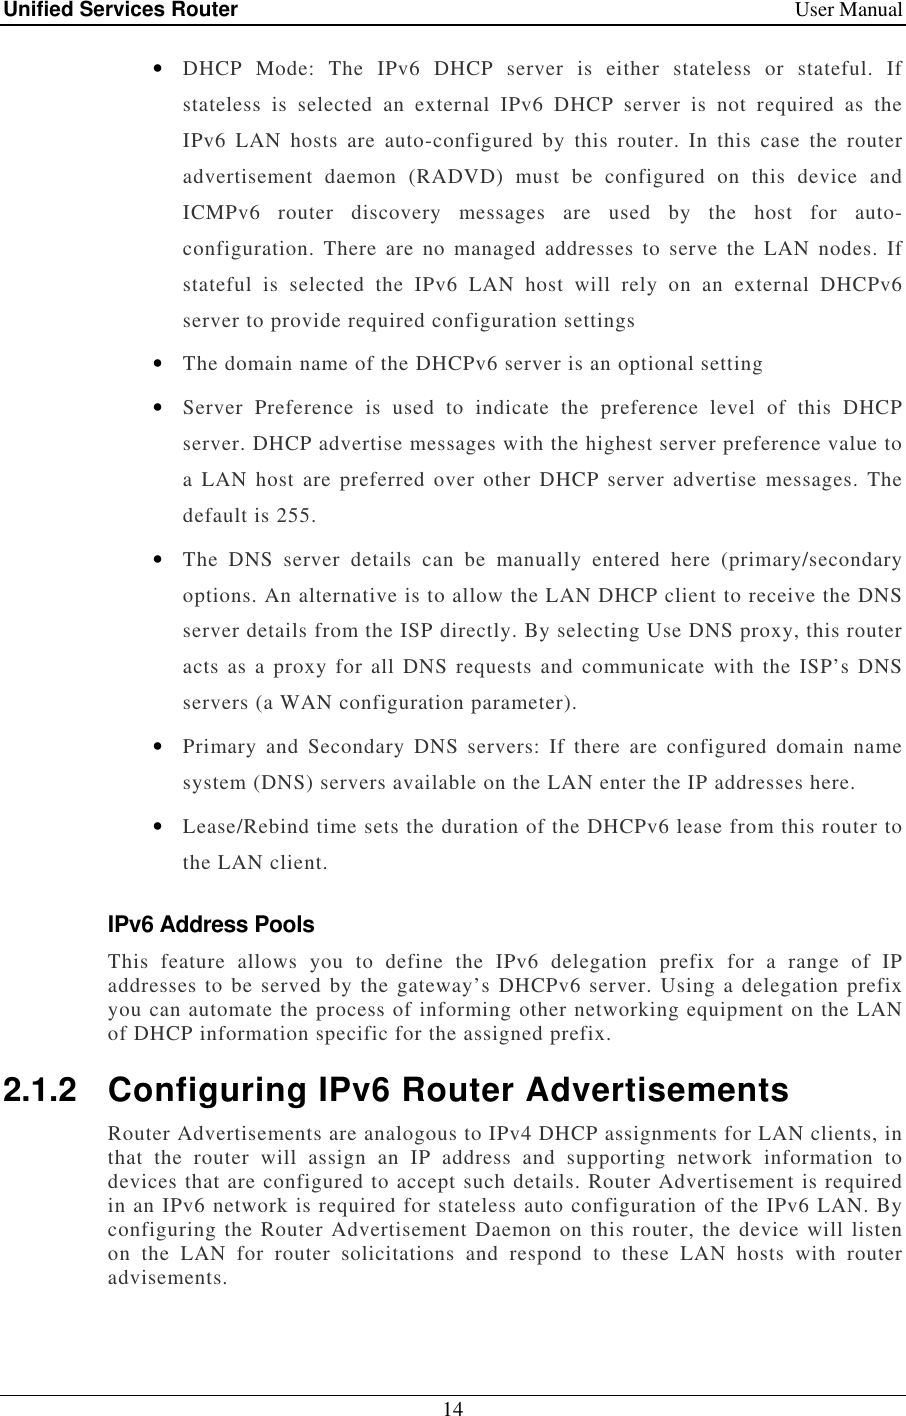 Unified Services Router    User Manual 14  • DHCP  Mode:  The  IPv6  DHCP  server  is  either  stateless  or  stateful.  If stateless  is  selected  an  external  IPv6  DHCP  server  is  not  required  as  the IPv6  LAN  hosts  are  auto-configured  by  this  router.  In  this  case  the  router advertisement  daemon  (RADVD)  must  be  configured  on  this  device  and ICMPv6  router  discovery  messages  are  used  by  the  host  for  auto-configuration.  There  are  no  managed  addresses to  serve  the LAN nodes.  If stateful  is  selected  the  IPv6  LAN  host  will  rely  on  an  external  DHCPv6 server to provide required configuration settings • The domain name of the DHCPv6 server is an optional setting • Server  Preference  is  used  to  indicate  the  preference  level  of  this  DHCP server. DHCP advertise messages with the highest server preference value to a  LAN host  are preferred  over  other  DHCP  server  advertise messages.  The default is 255. • The  DNS  server  details  can  be  manually  entered  here  (primary/secondary options. An alternative is to allow the LAN DHCP client to receive the DNS server details from the ISP directly. By selecting Use DNS proxy, this router acts as  a proxy for  all DNS requests  and communicate with the  ISP’s DNS servers (a WAN configuration parameter). • Primary  and  Secondary  DNS  servers:  If  there  are  configured  domain  name system (DNS) servers available on the LAN enter the IP addresses here.  • Lease/Rebind time sets the duration of the DHCPv6 lease from this router to the LAN client. IPv6 Address Pools This  feature  allows  you  to  define  the  IPv6  delegation  prefix  for  a  range  of  IP addresses  to be served by  the  gateway’s DHCPv6 server.  Using a  delegation prefix you can automate the process of informing other networking equipment on the LAN of DHCP information specific for the assigned prefix. 2.1.2  Configuring IPv6 Router Advertisements Router Advertisements are analogous to IPv4 DHCP assignments for LAN clients, in that  the  router  will  assign  an  IP  address  and  supporting  network  information  to devices that are configured to accept such details. Router Advertisement is required in an IPv6 network is required for stateless auto configuration of the IPv6 LAN. By configuring the Router Advertisement Daemon on this router, the device will listen on  the  LAN  for  router  solicitations  and  respond  to  these  LAN  hosts  with  router advisements. 